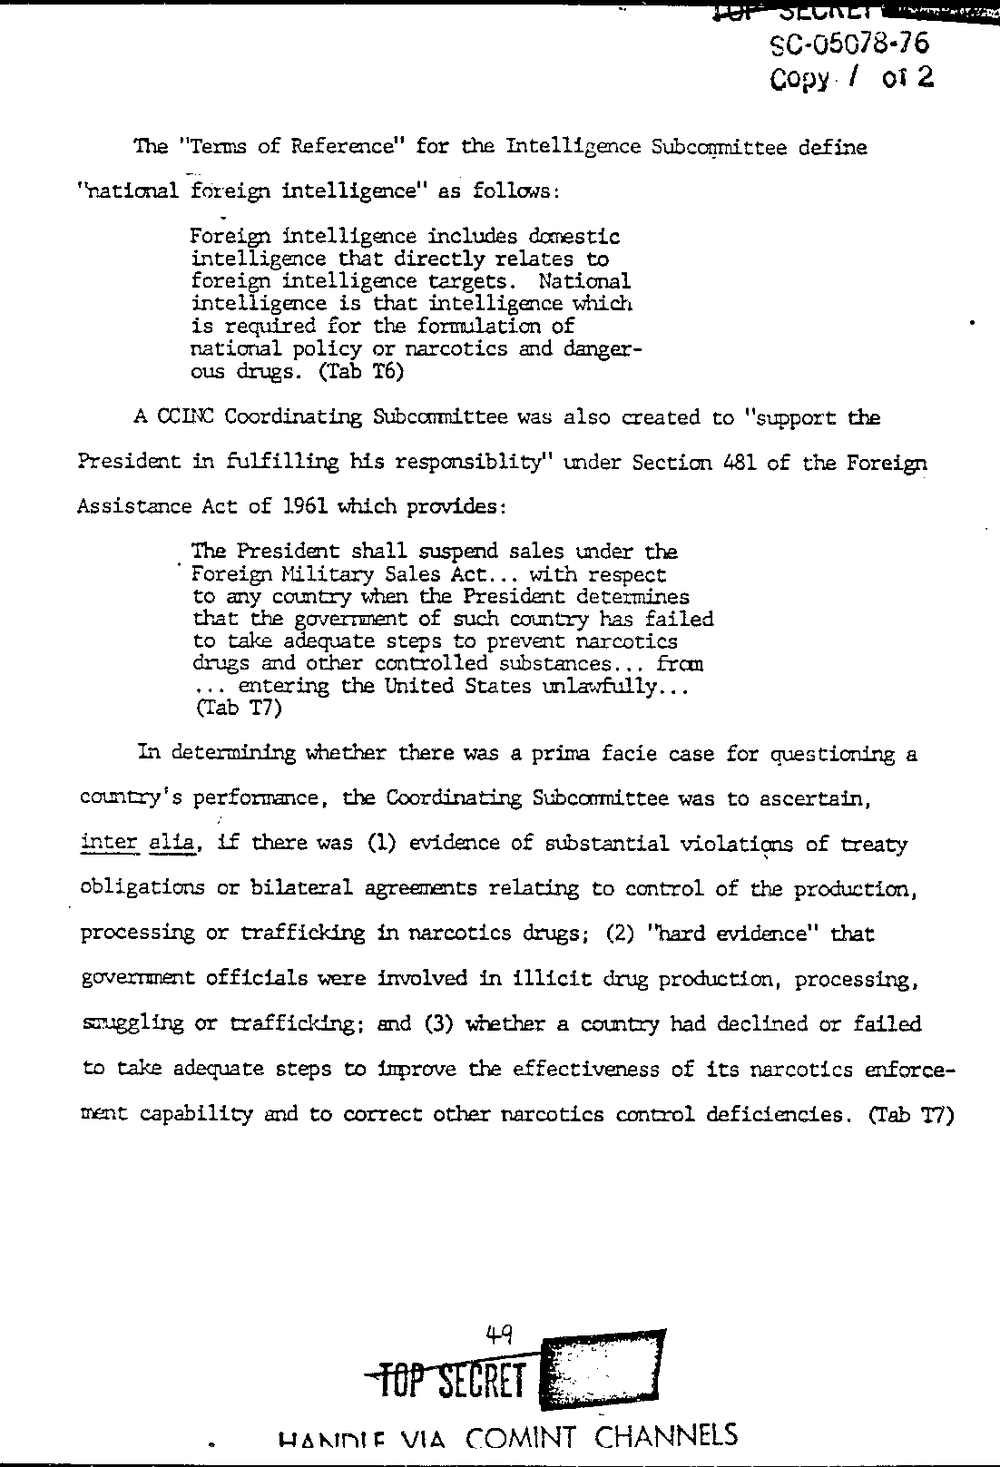 Page 57 from Report on Inquiry Into CIA Related Electronic Surveillance Activities